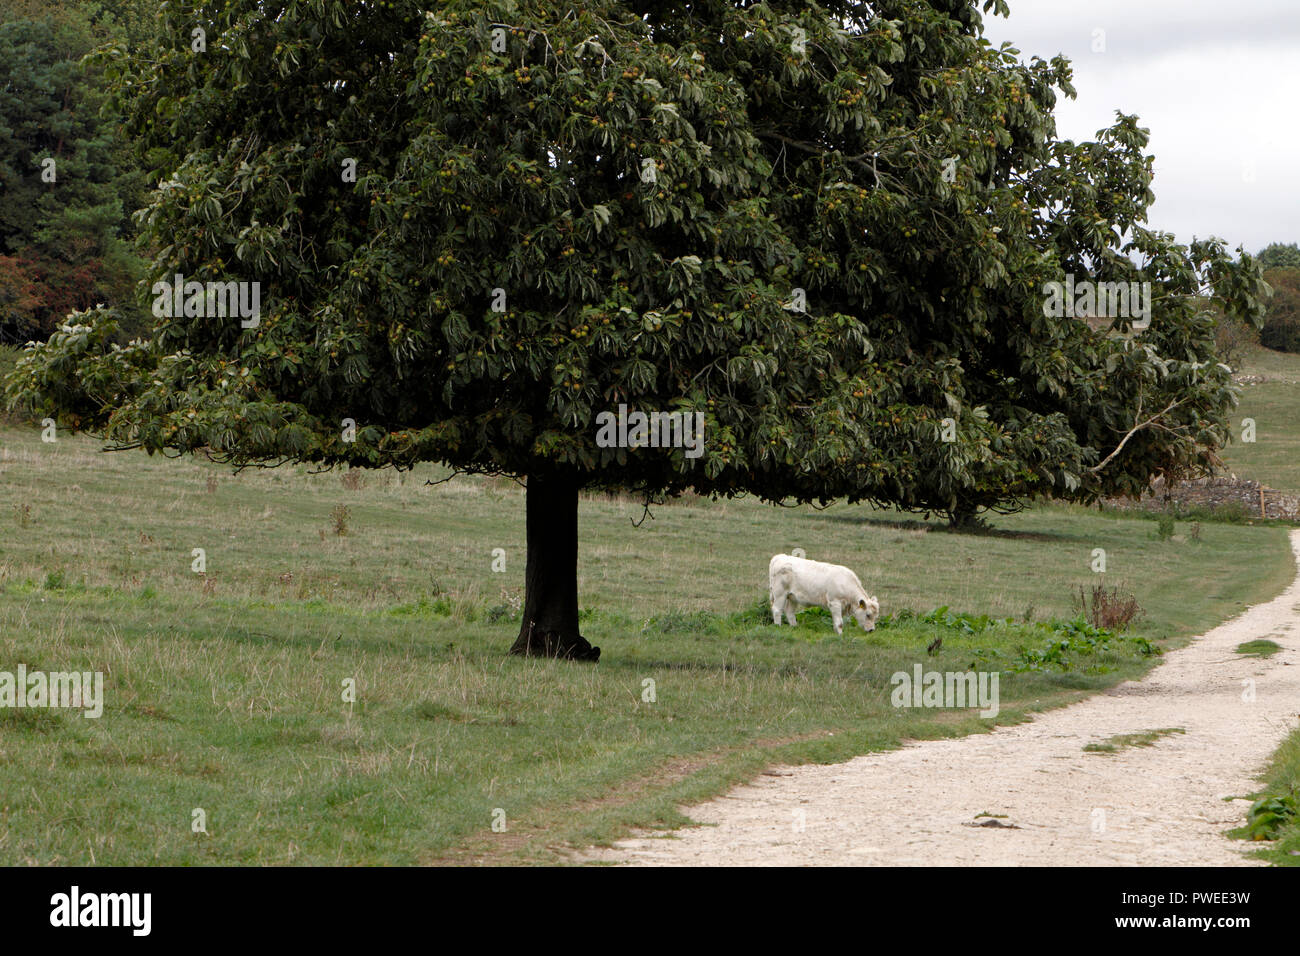 Broadleaf tree in the UK, pruned or cut or eaten below the height of the livestock around it. Stock Photo